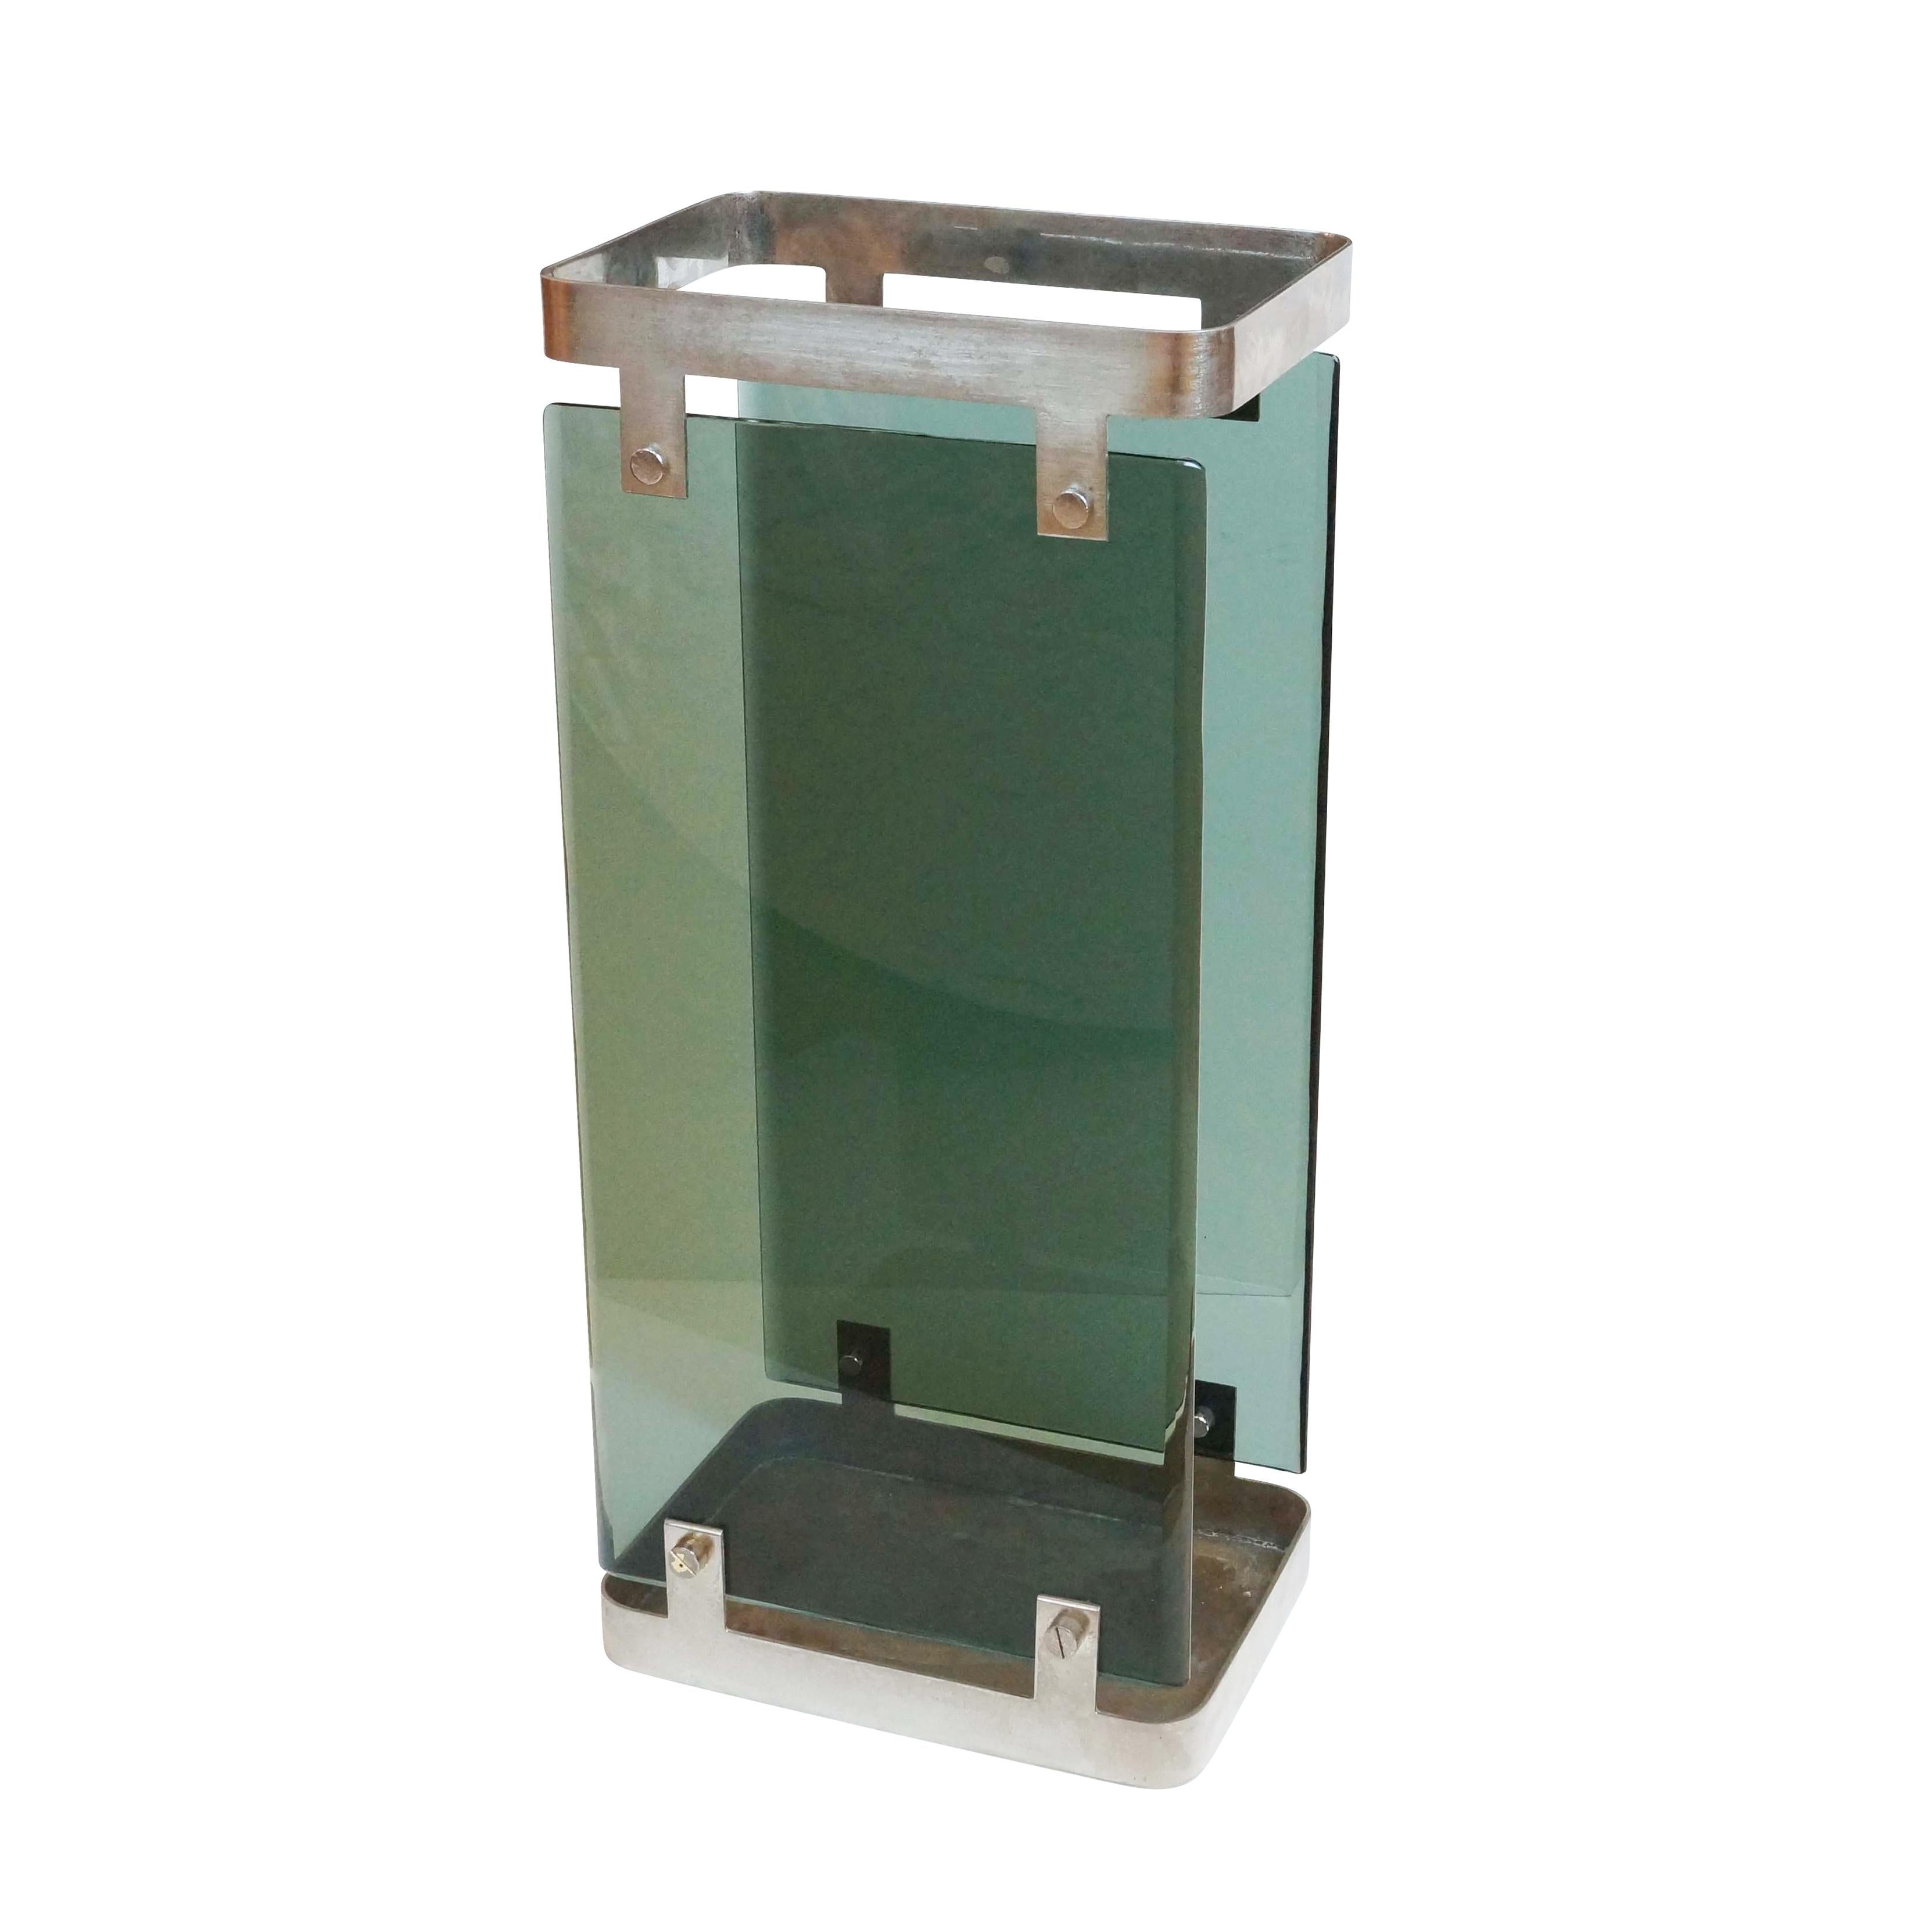 Refined 1960s Fontana Arte umbrella stand designed by Max Ingrand composed of two beveled green glasses mounted on brushed nickel frame. 

Condition: Excellent vintage condition, wear consistent with age and use. 

Width: 10.25” 

Depth: 7.5”